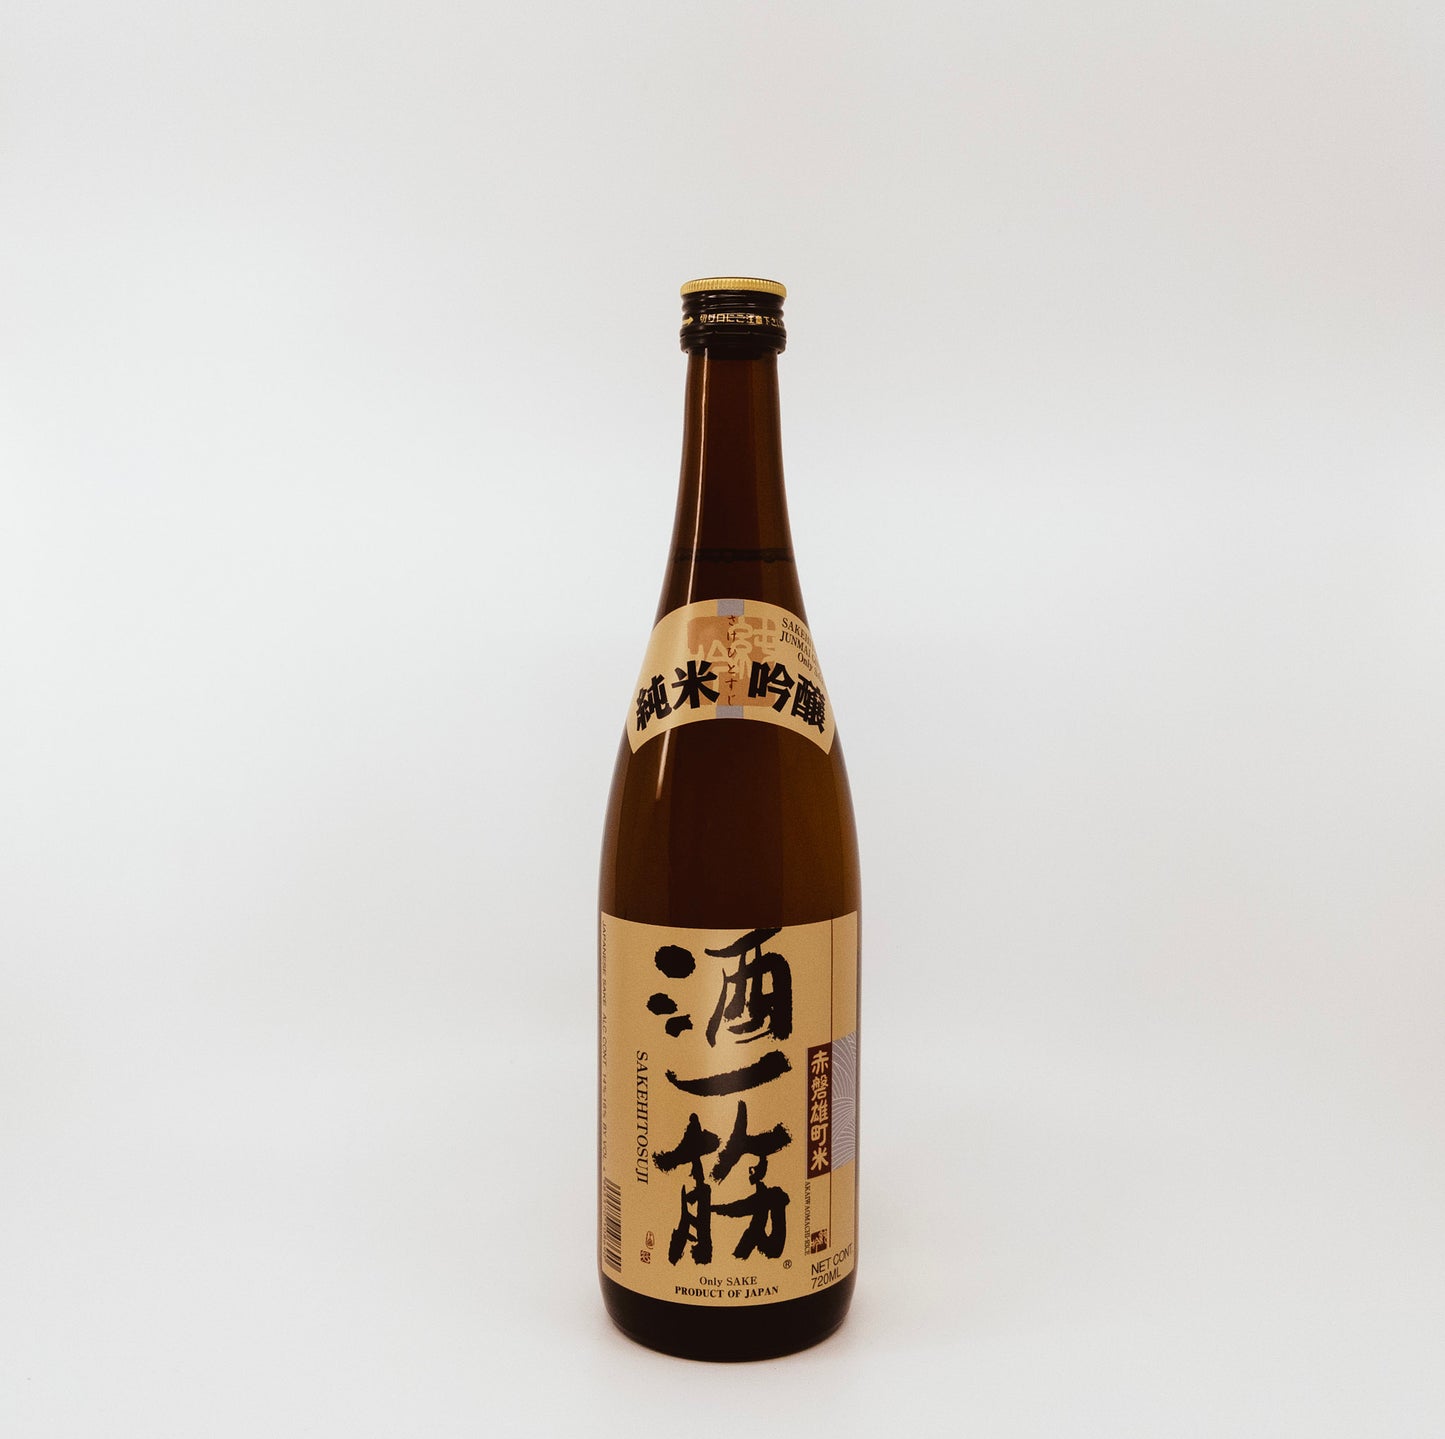 brown bottle with black writing on gold label